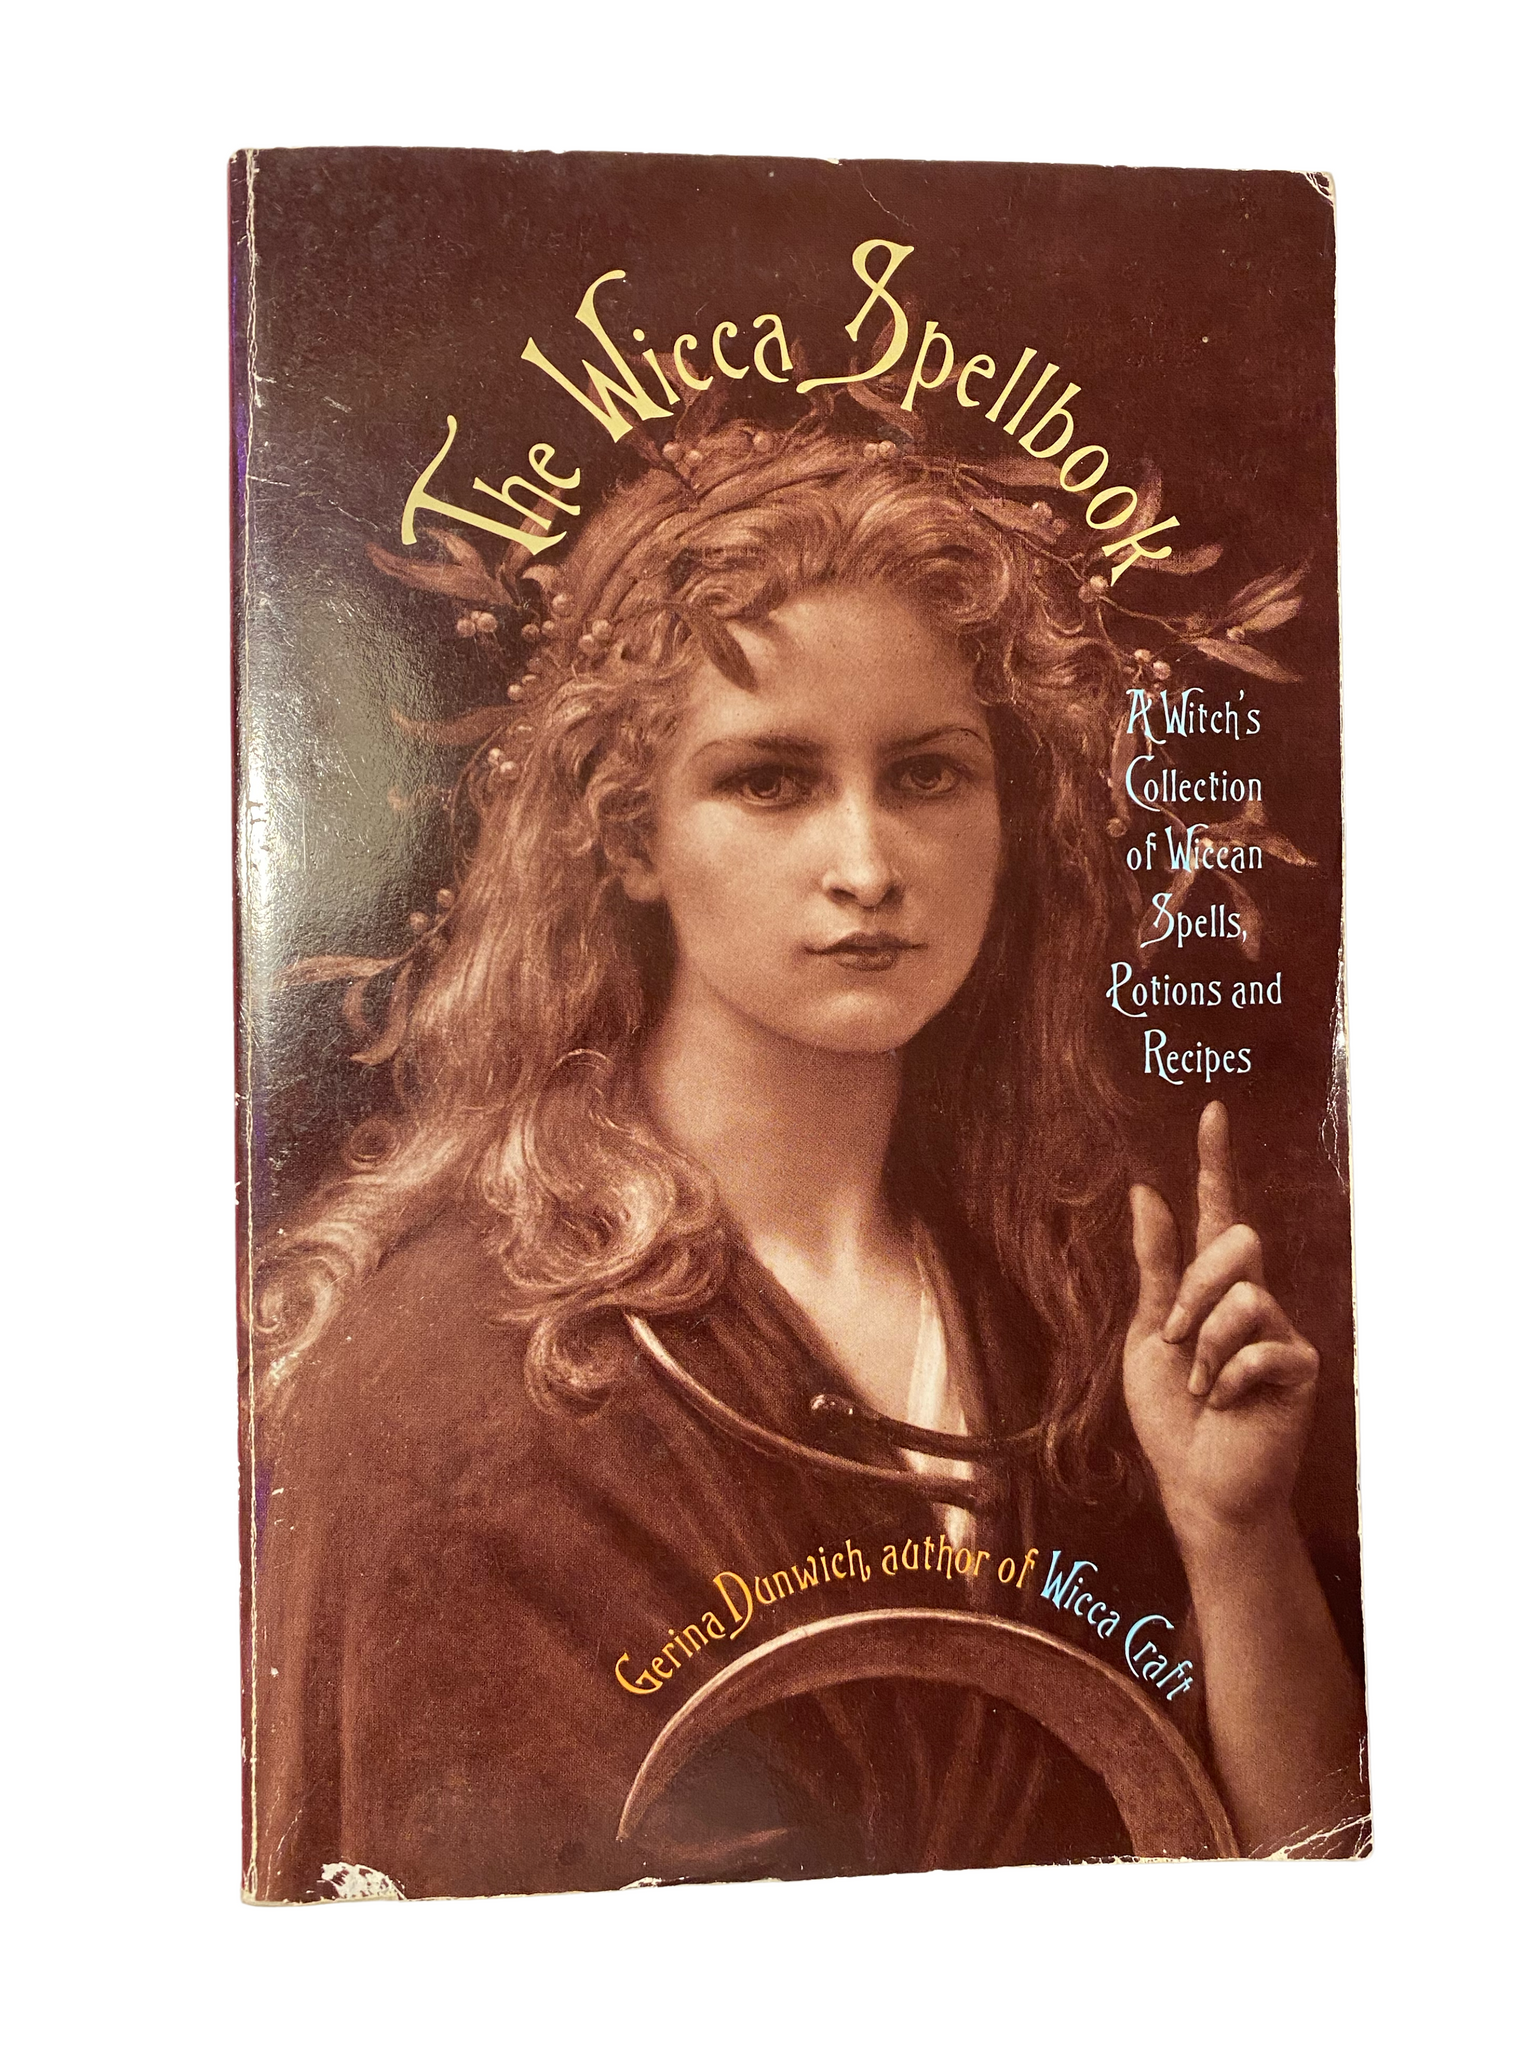 Books | The Wicca Spellbook: A Witch's Collection of Wiccan Spells, Potions, and Recipes